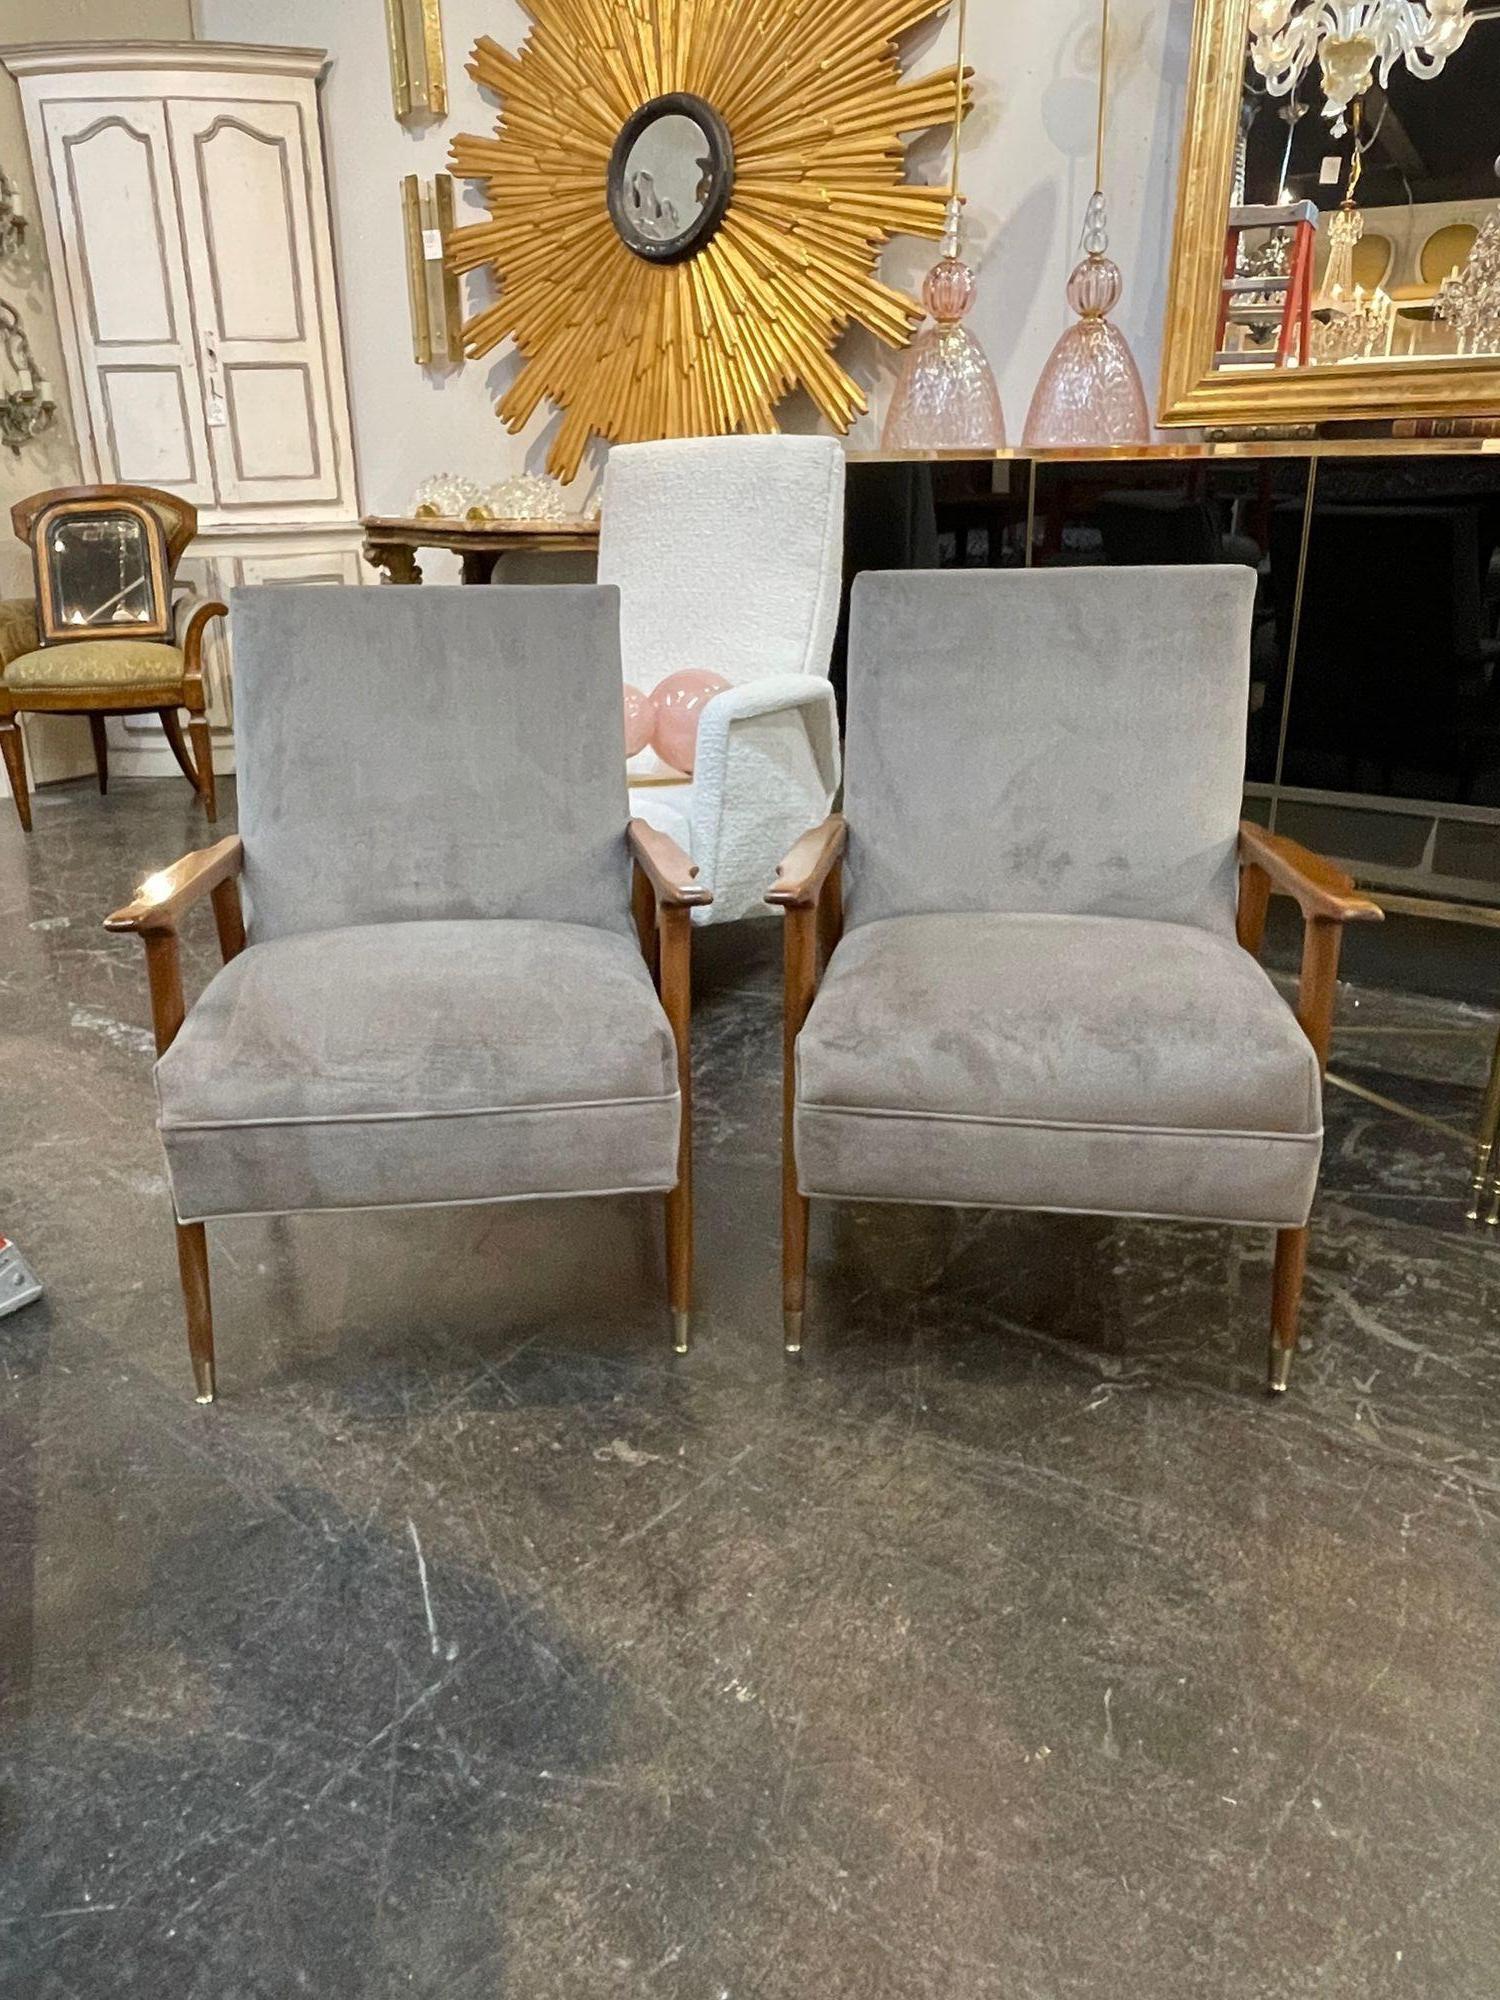 Handsome pair of mid-century Italian walnut Gio Ponti style armchairs. Circa 1960. A fine addition to any home!